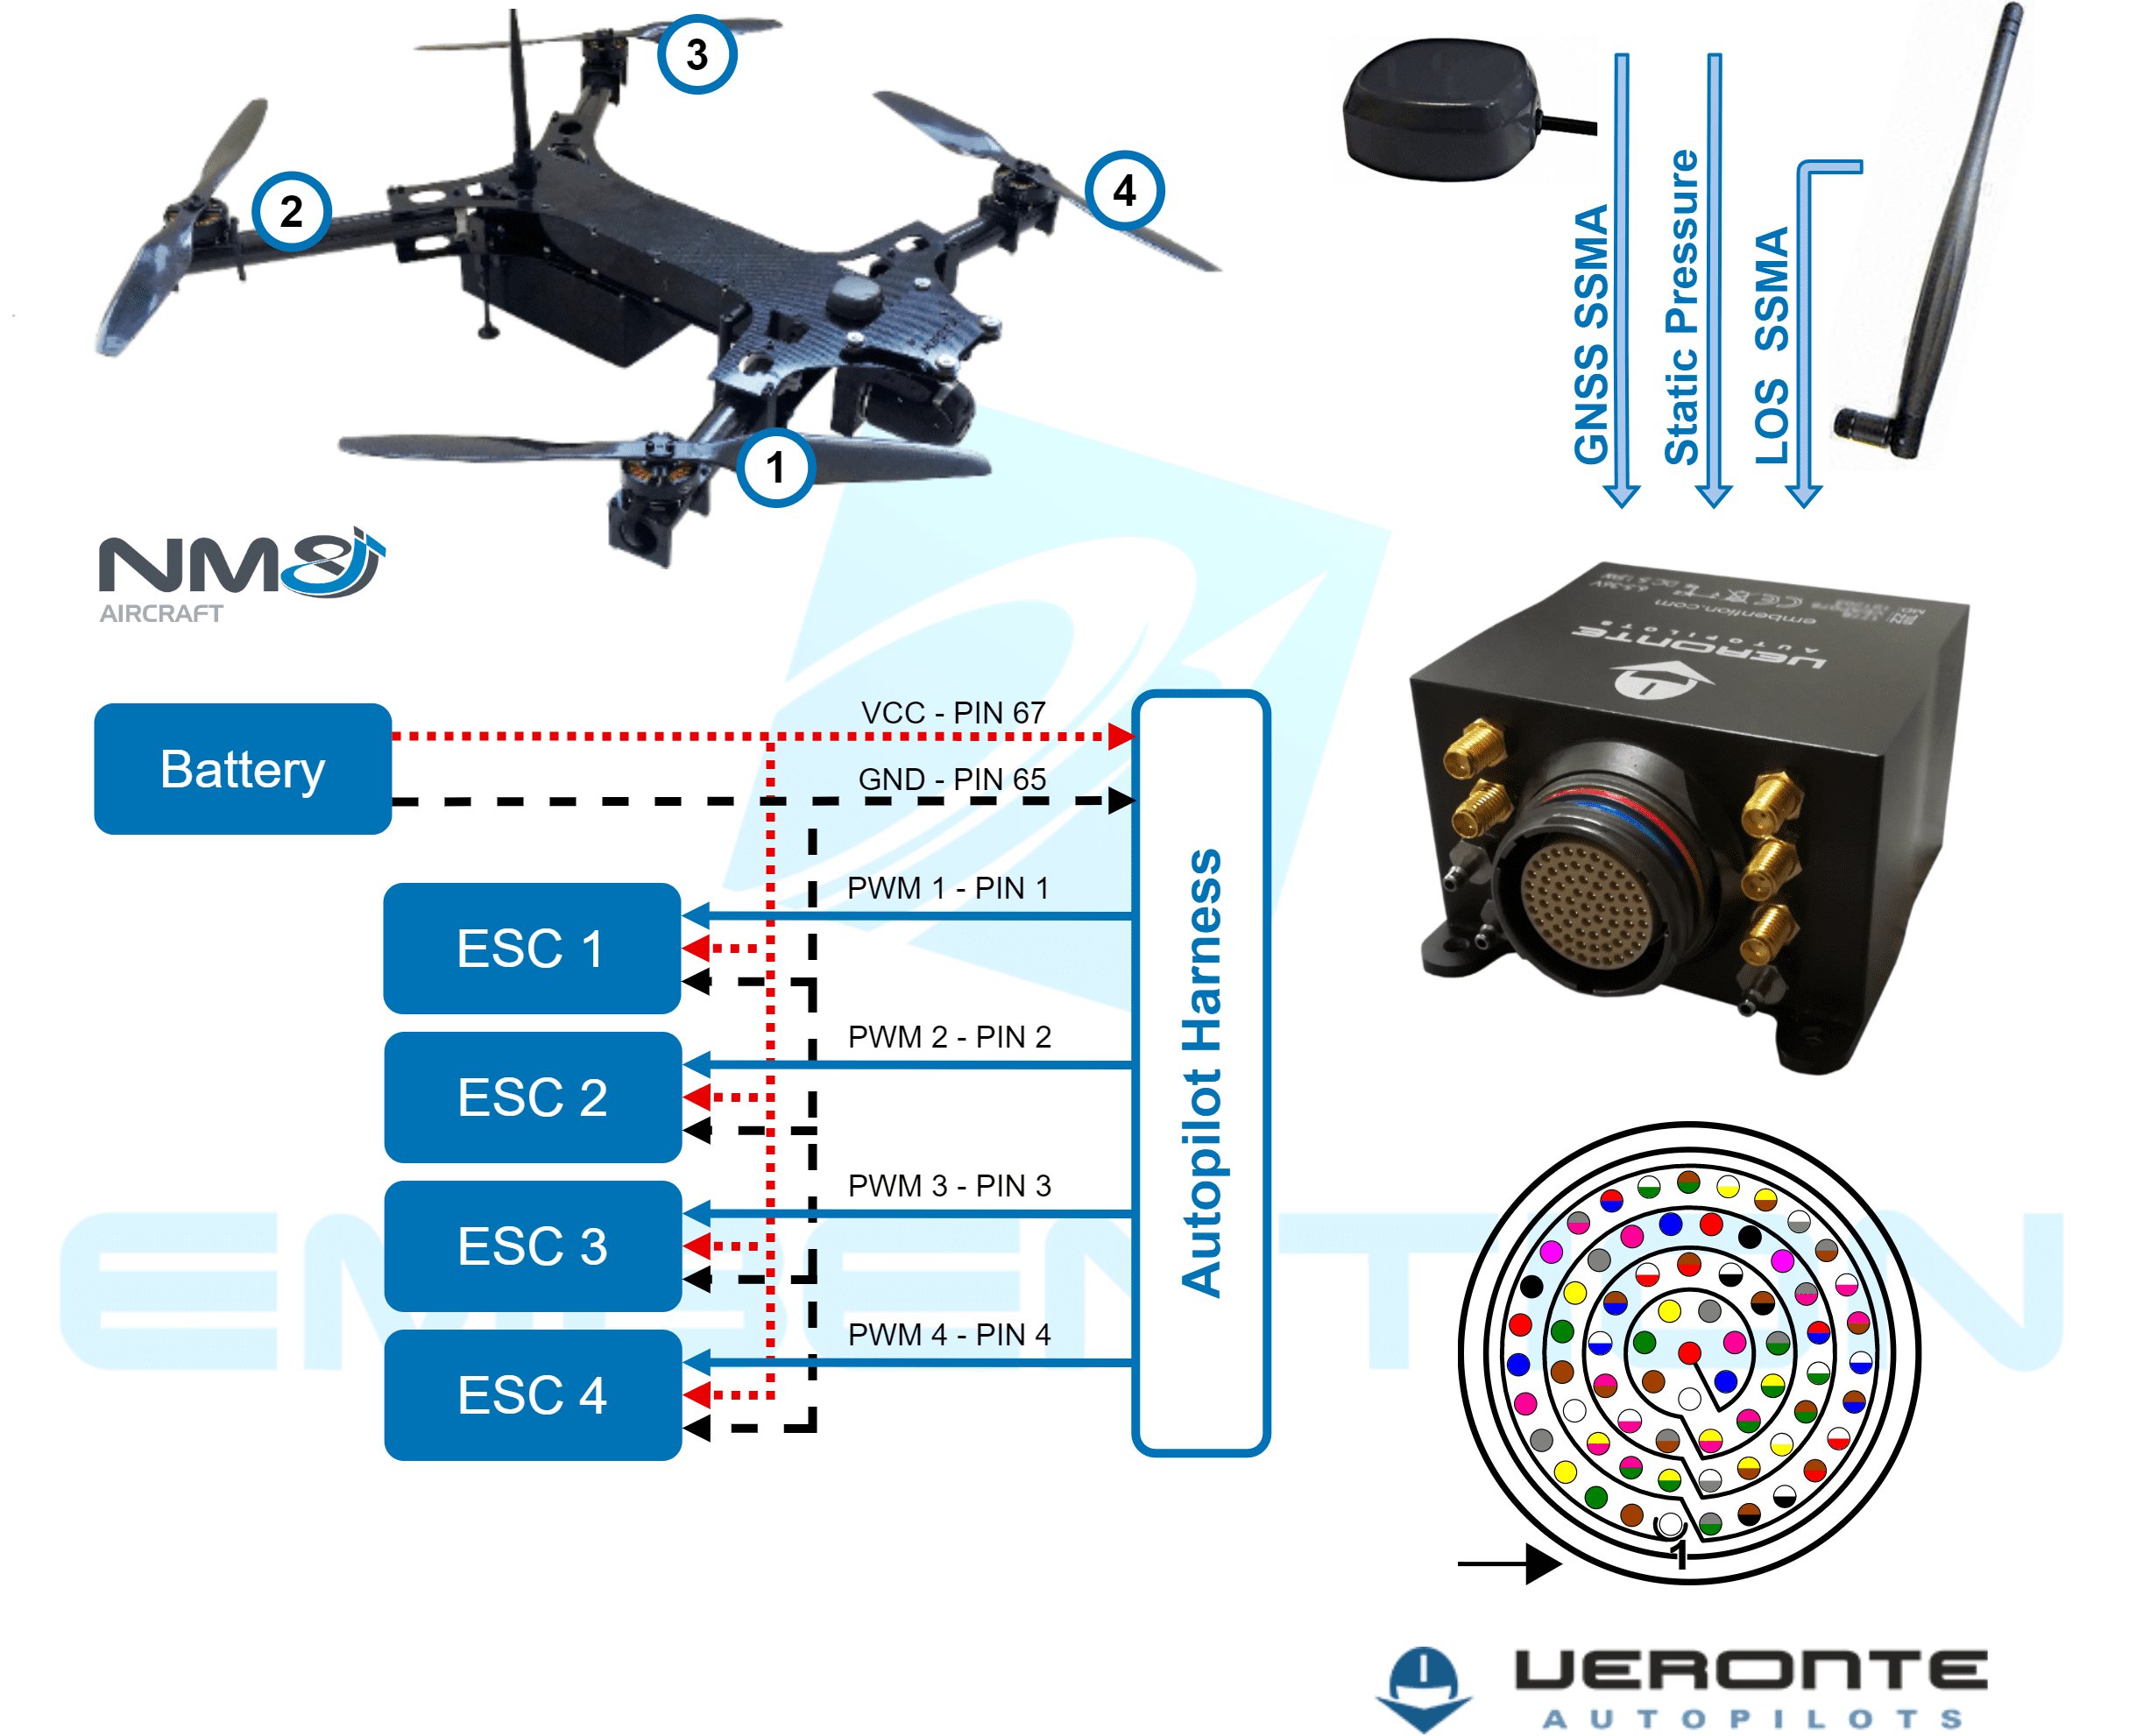 Annex 2: Connection examples - NM& Multicopter to Veronte Autopilot